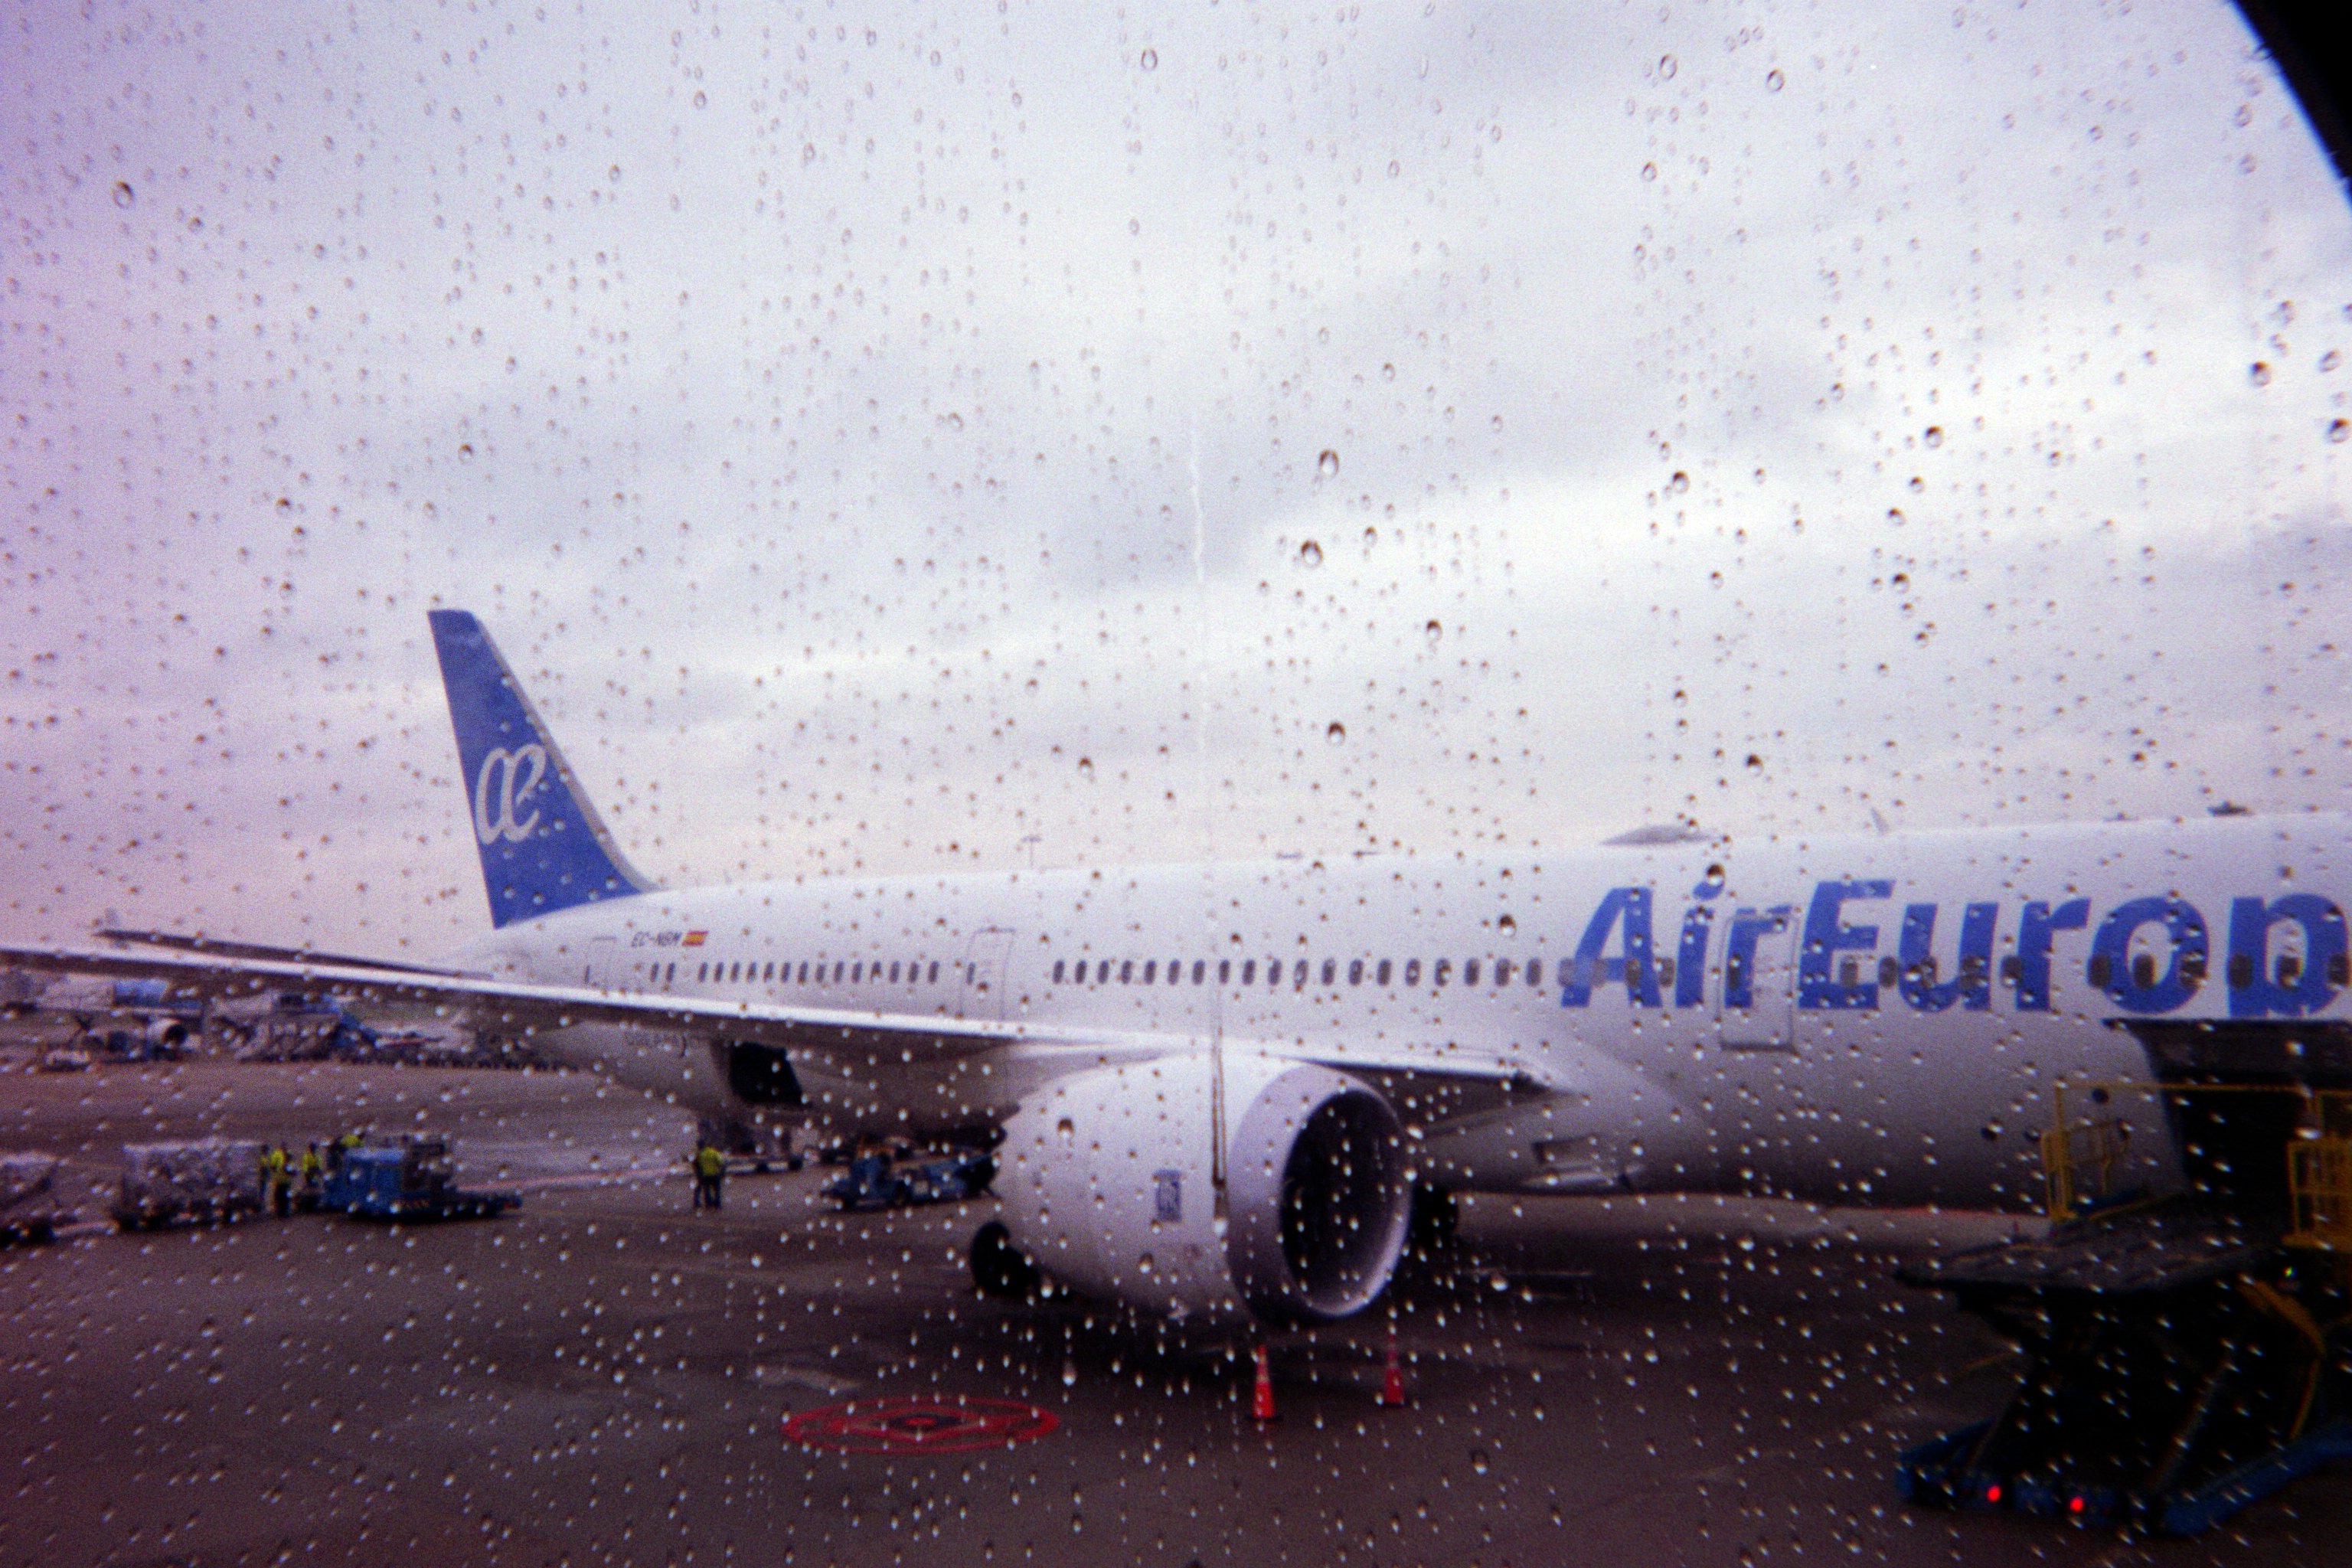 Airplane during a rainy day